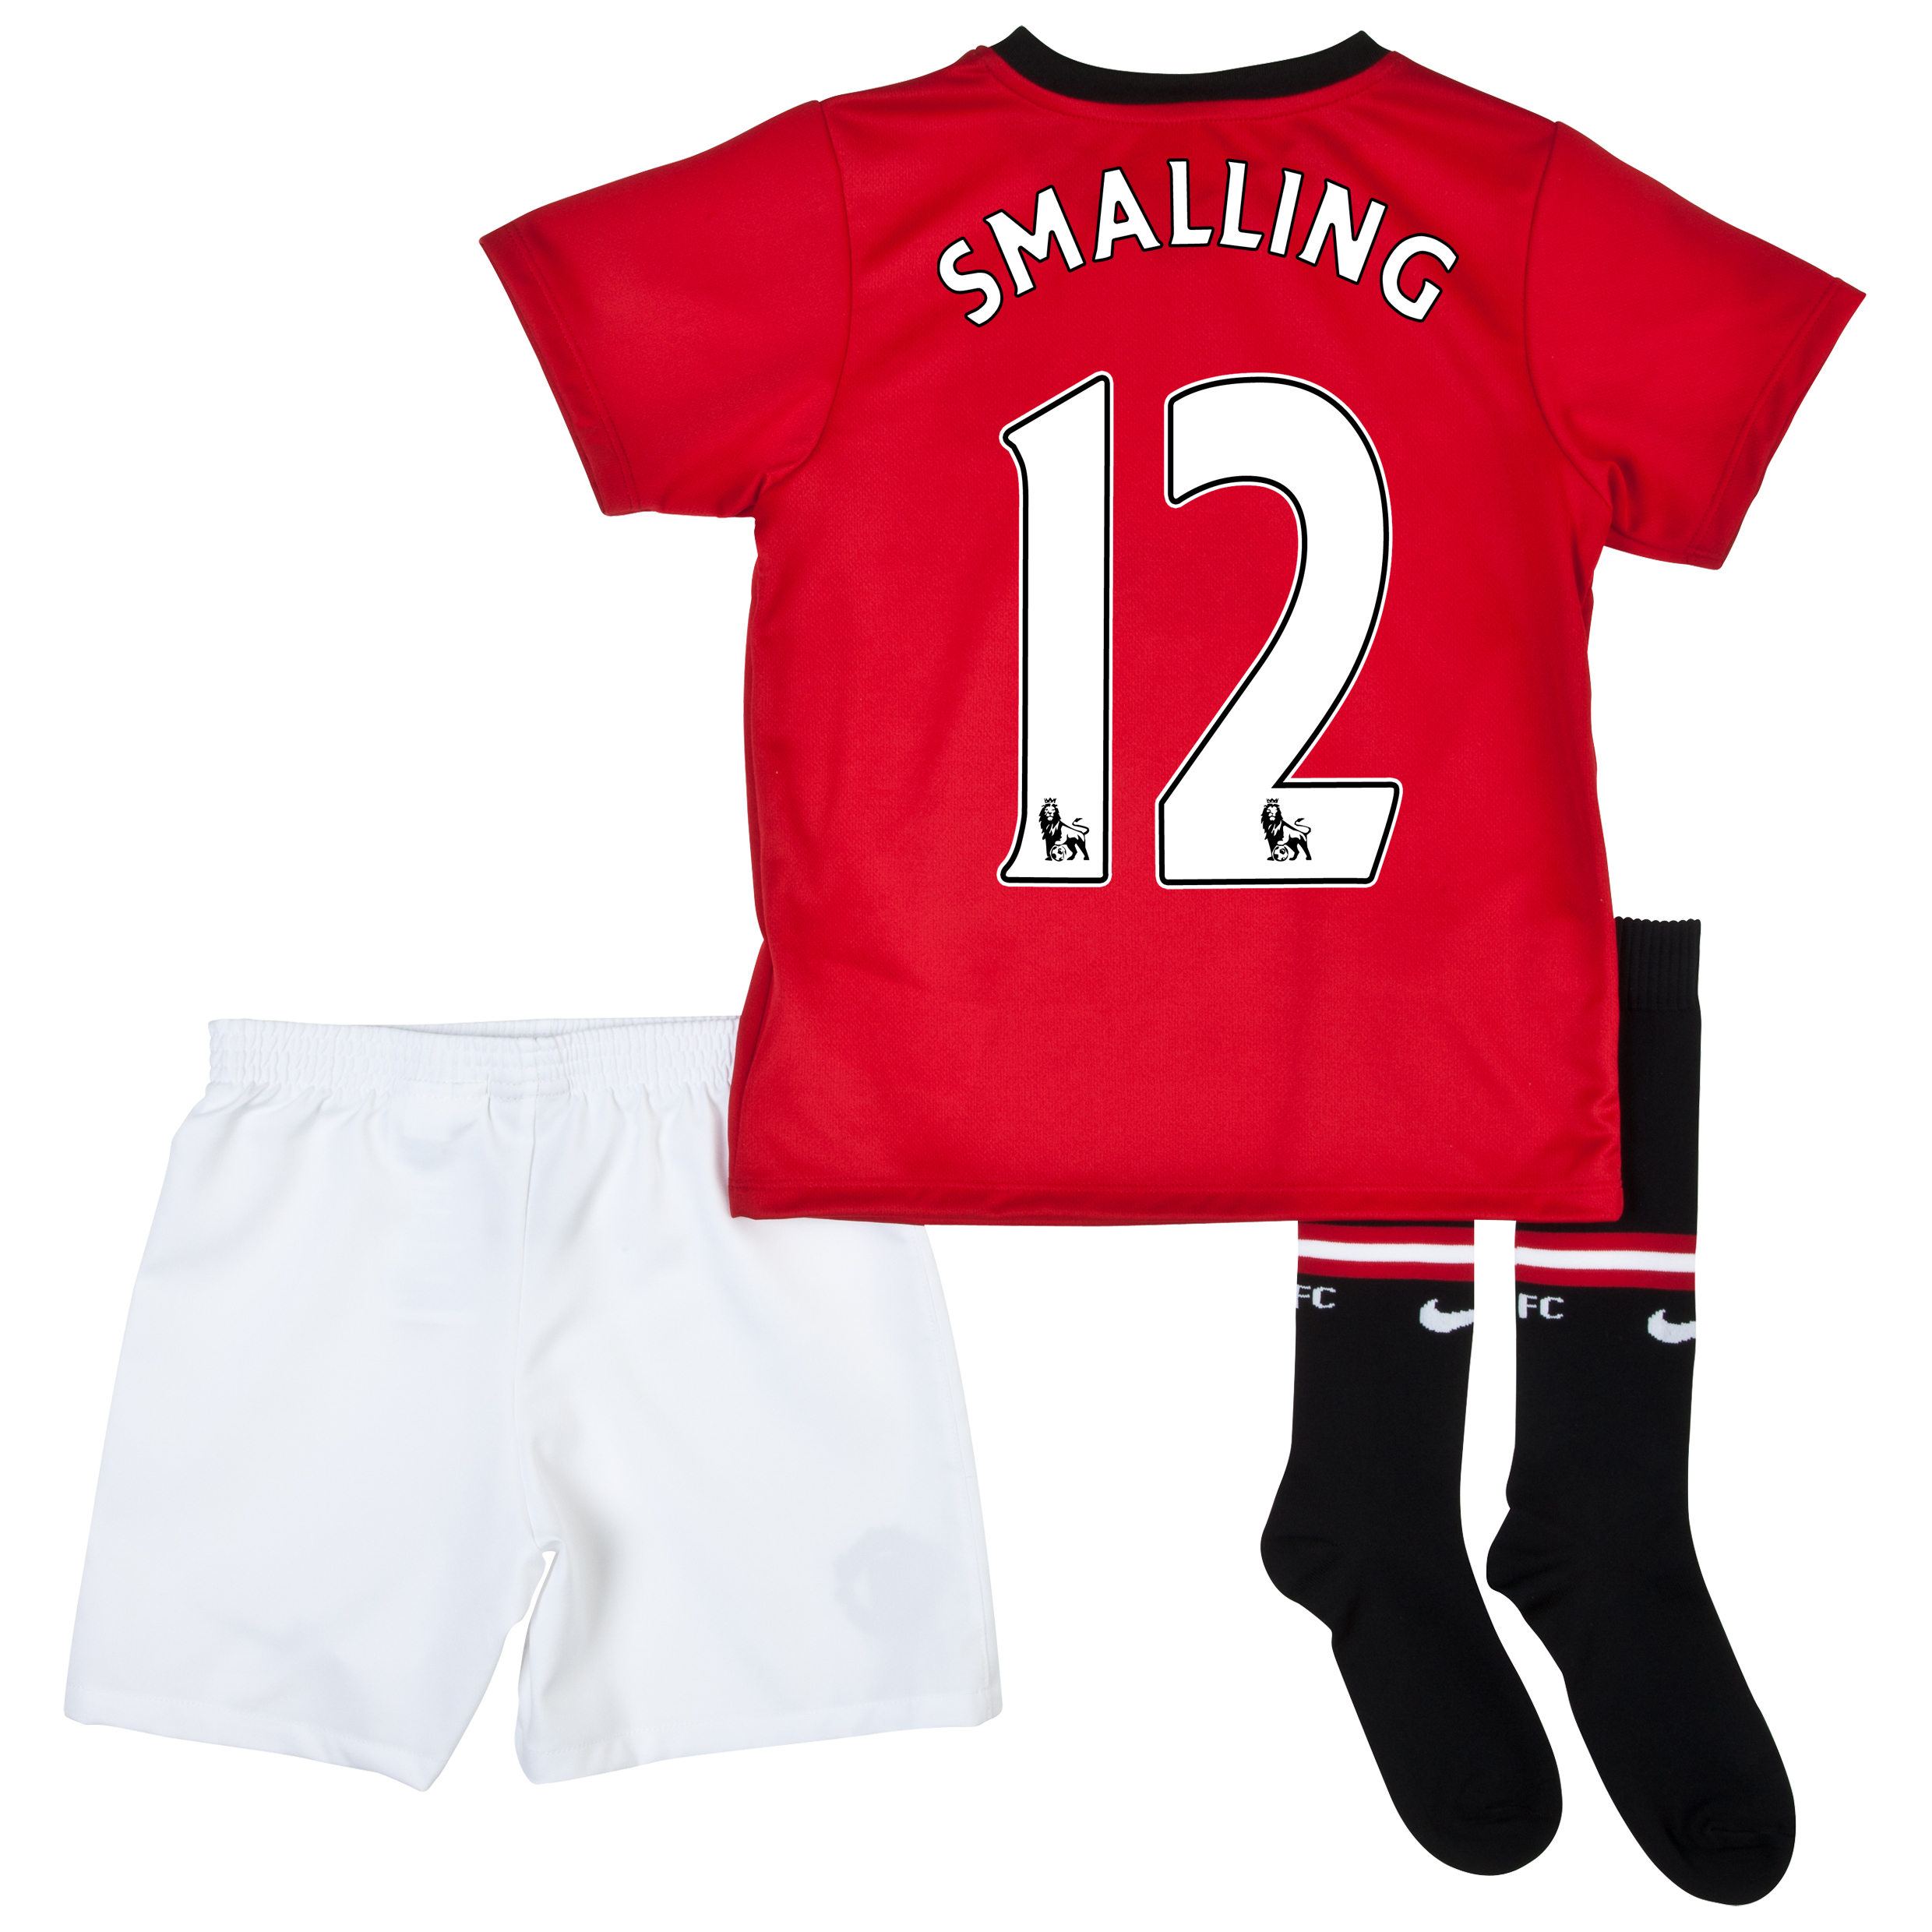 Manchester United Home Kit 2013/14 - Little Boys with Smalling 12 printing